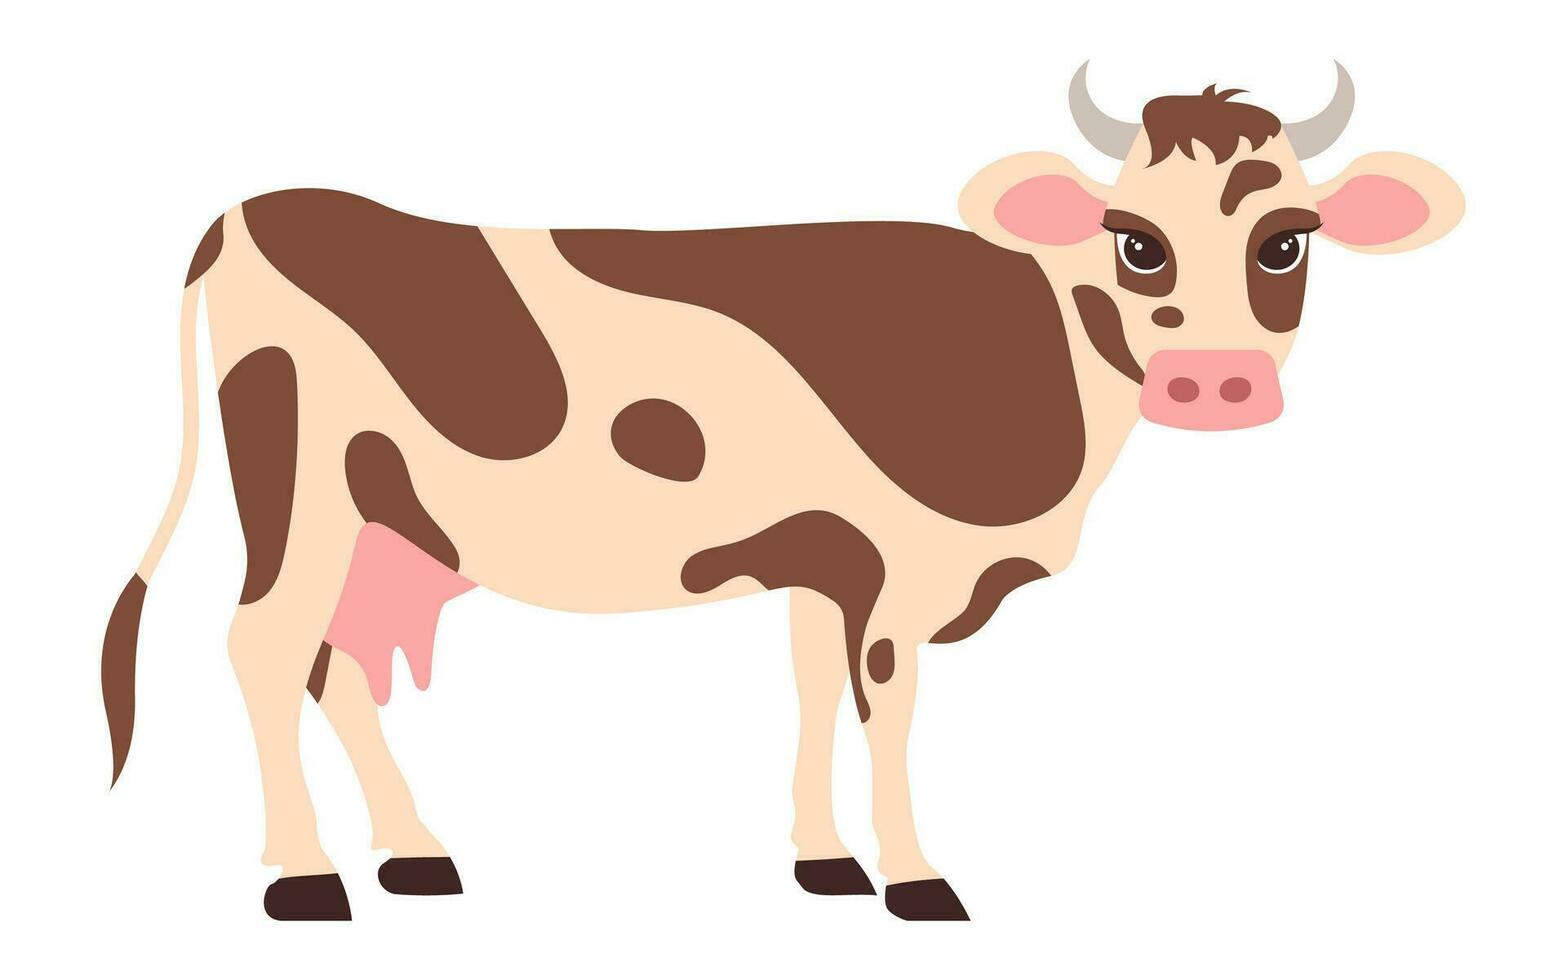 Cow in flat style. Vector illustration of a rural animal. Cute cow beige brown color.